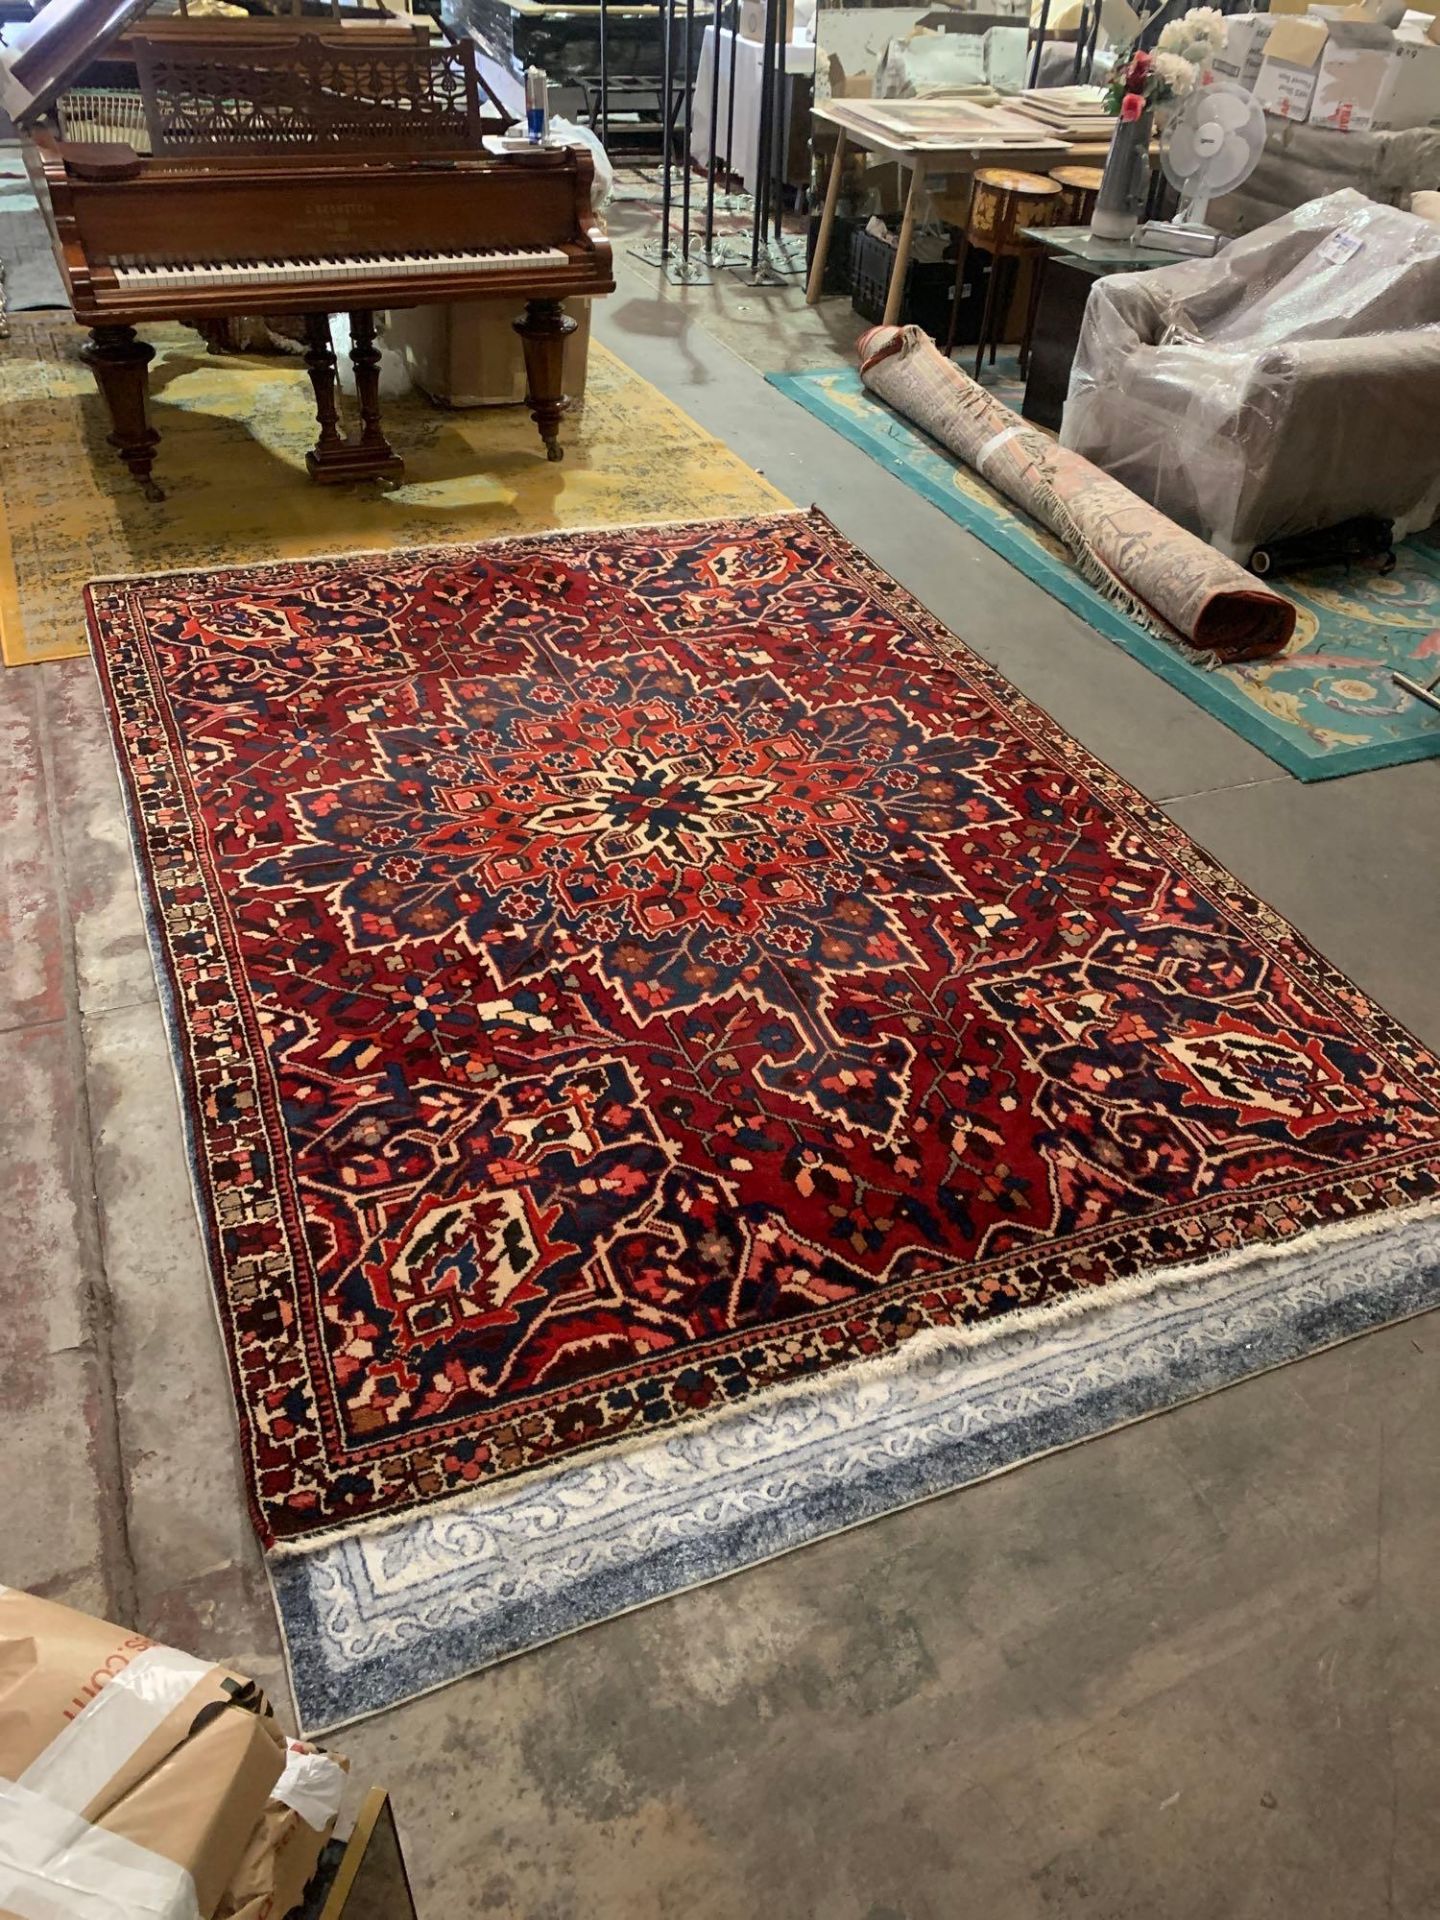 Azerbaijani Style Carpet Wool Pile Quality And High Artistic Value Hand Made Red Ground With A - Image 2 of 8